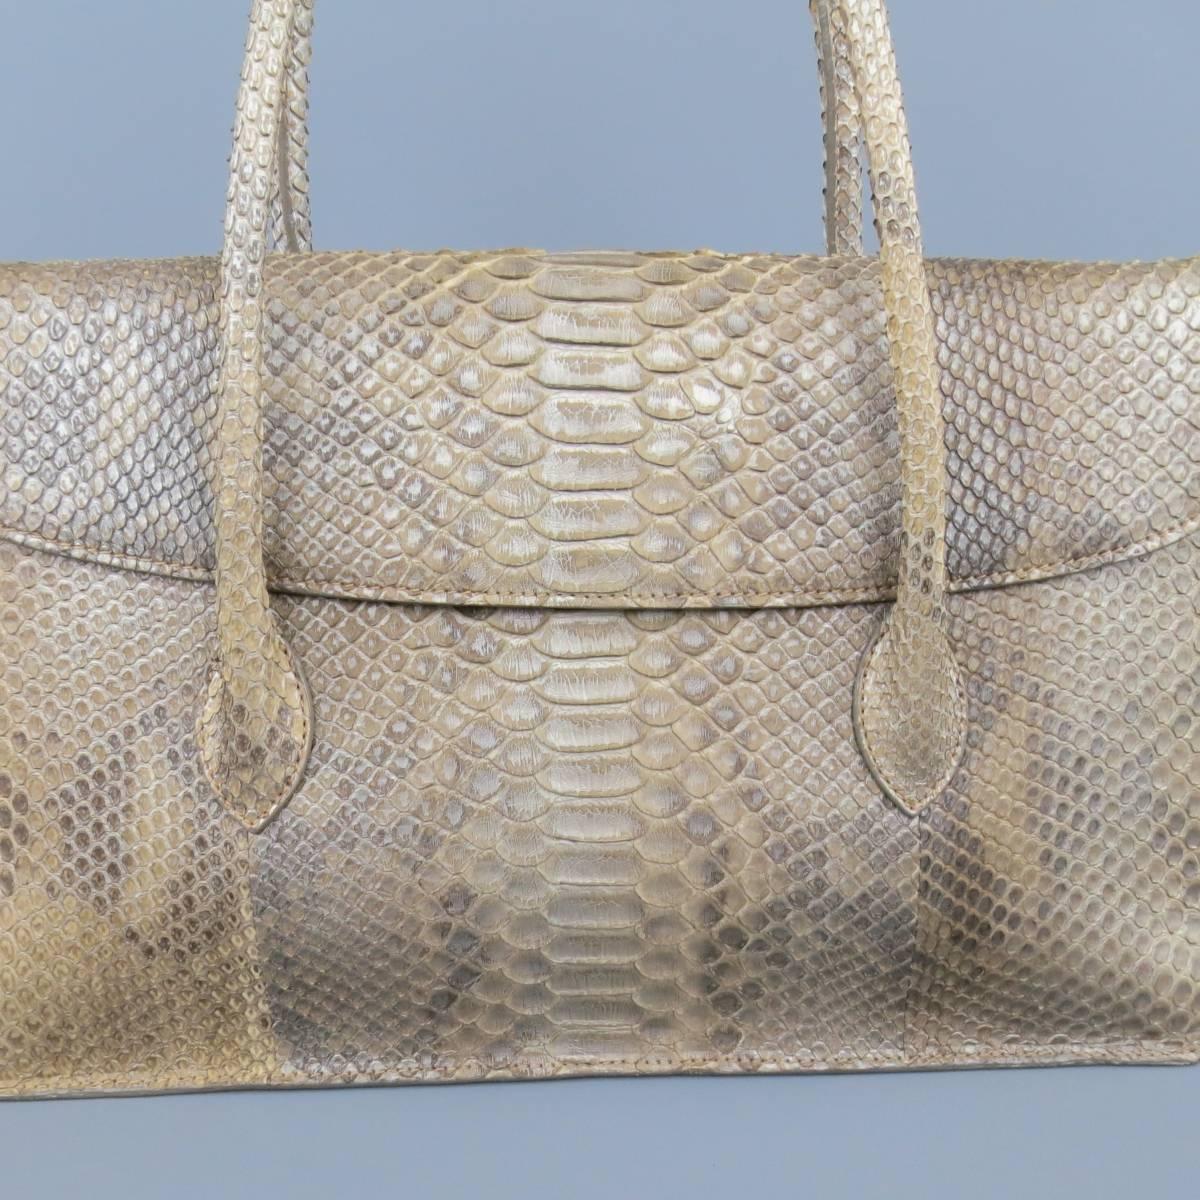 ALAIA shoulder bag in beige python skin leather with silver hues throughout features flap closure with snap. Inside features a divider middle pocket with zip closure, multiple compartment pockets throughout. Lined in a warm beige leather. Includes